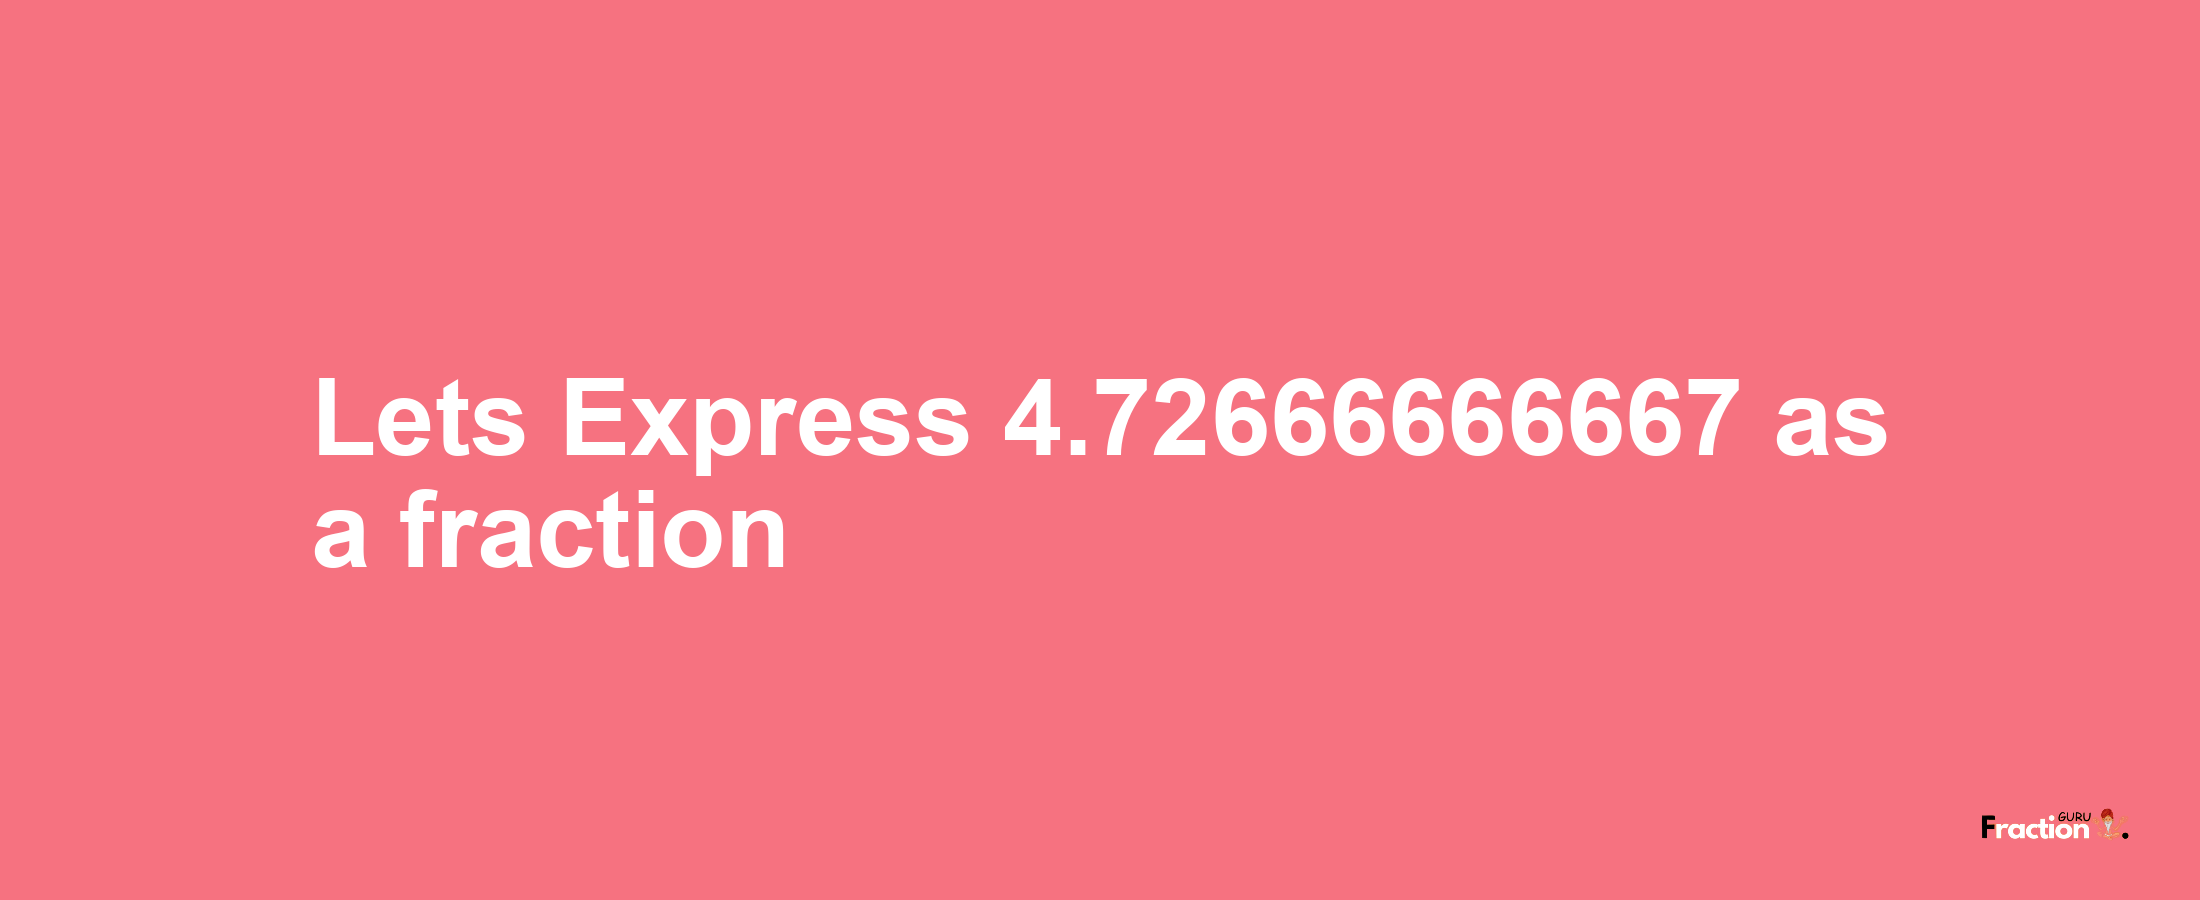 Lets Express 4.72666666667 as afraction